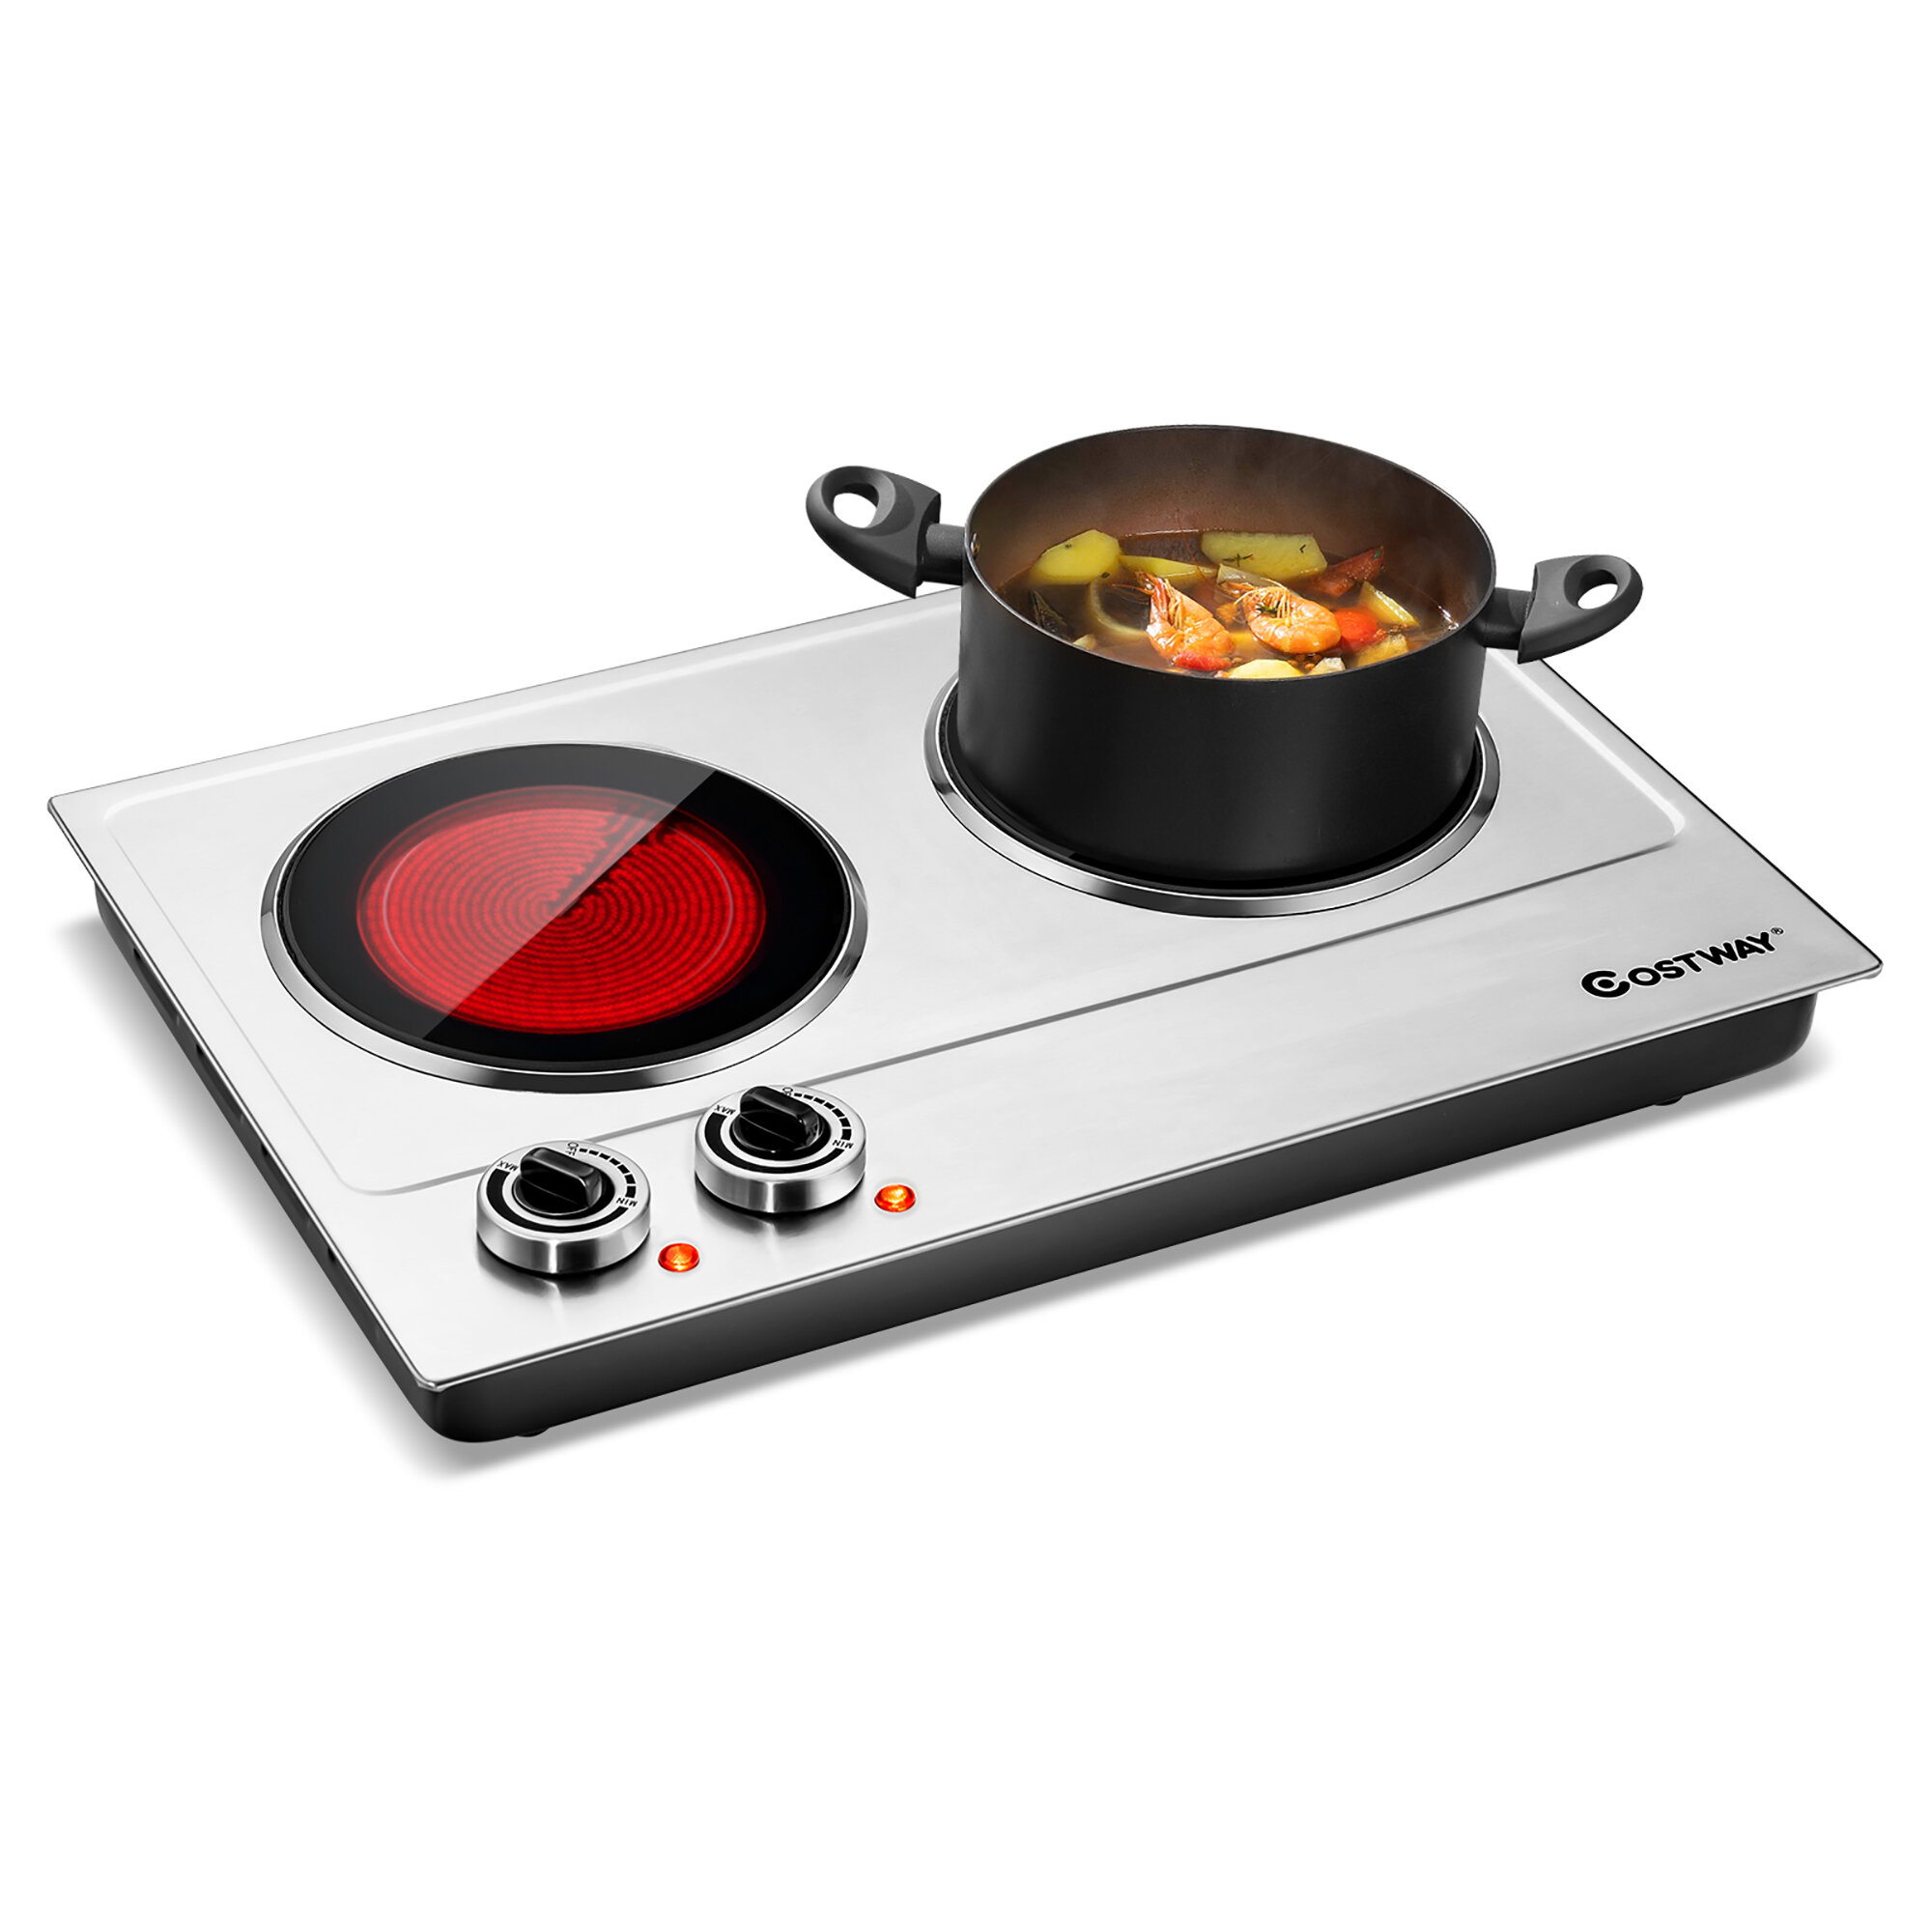 CUSIMAX Hot Plate, Electric Double Burner, 1800W Cast Iron Countertop  Cooktop, Portable for Cooking, Compatible for All Cookwares, Easy Clean